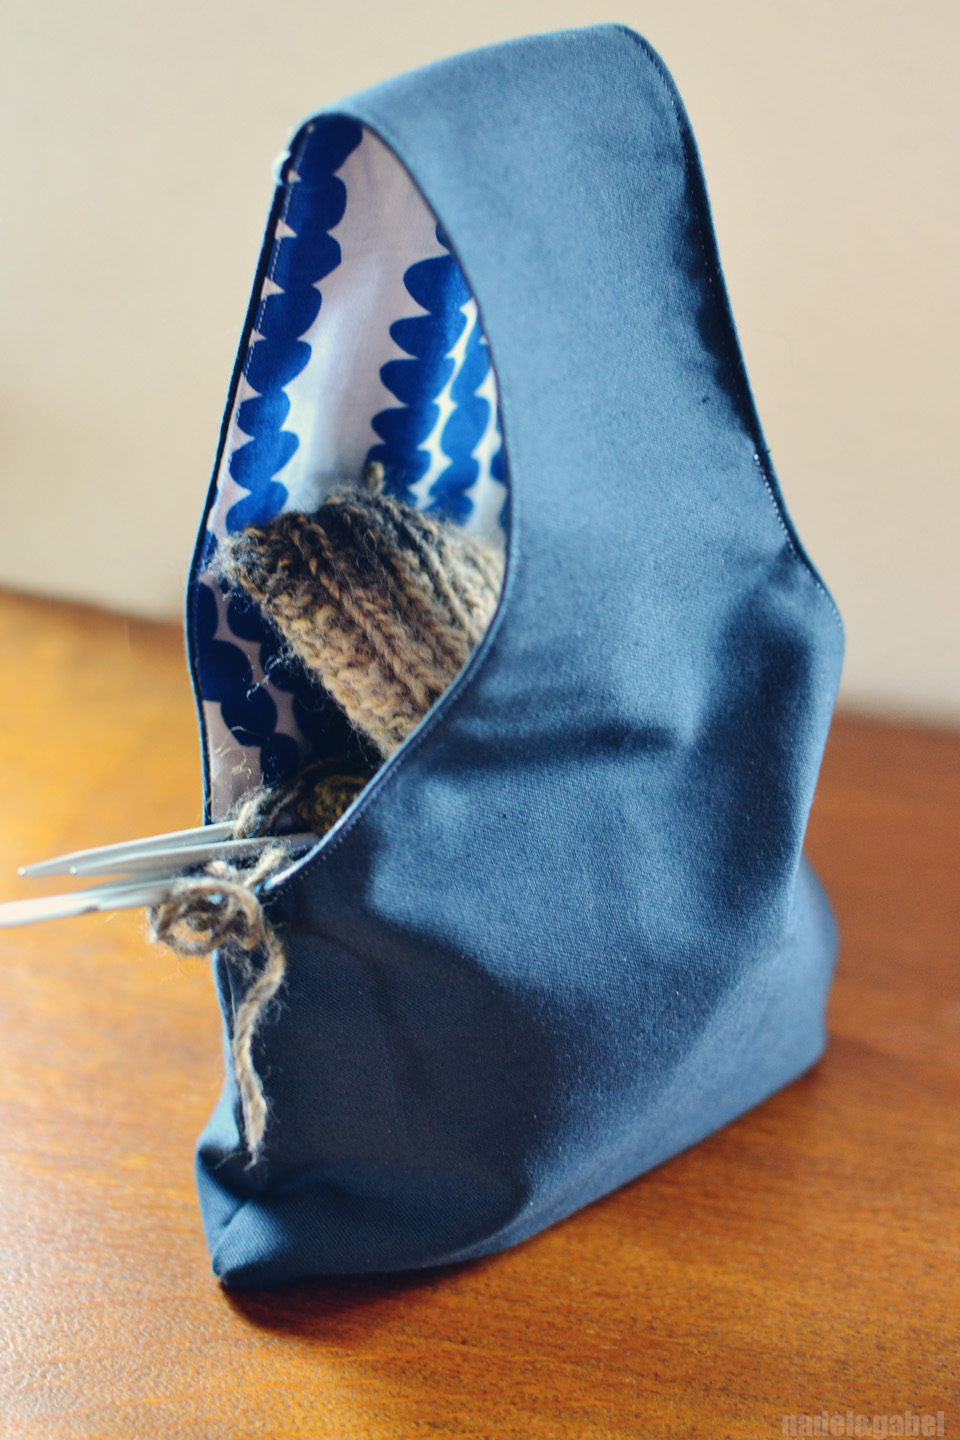 Handy – Reversible knitters project bag